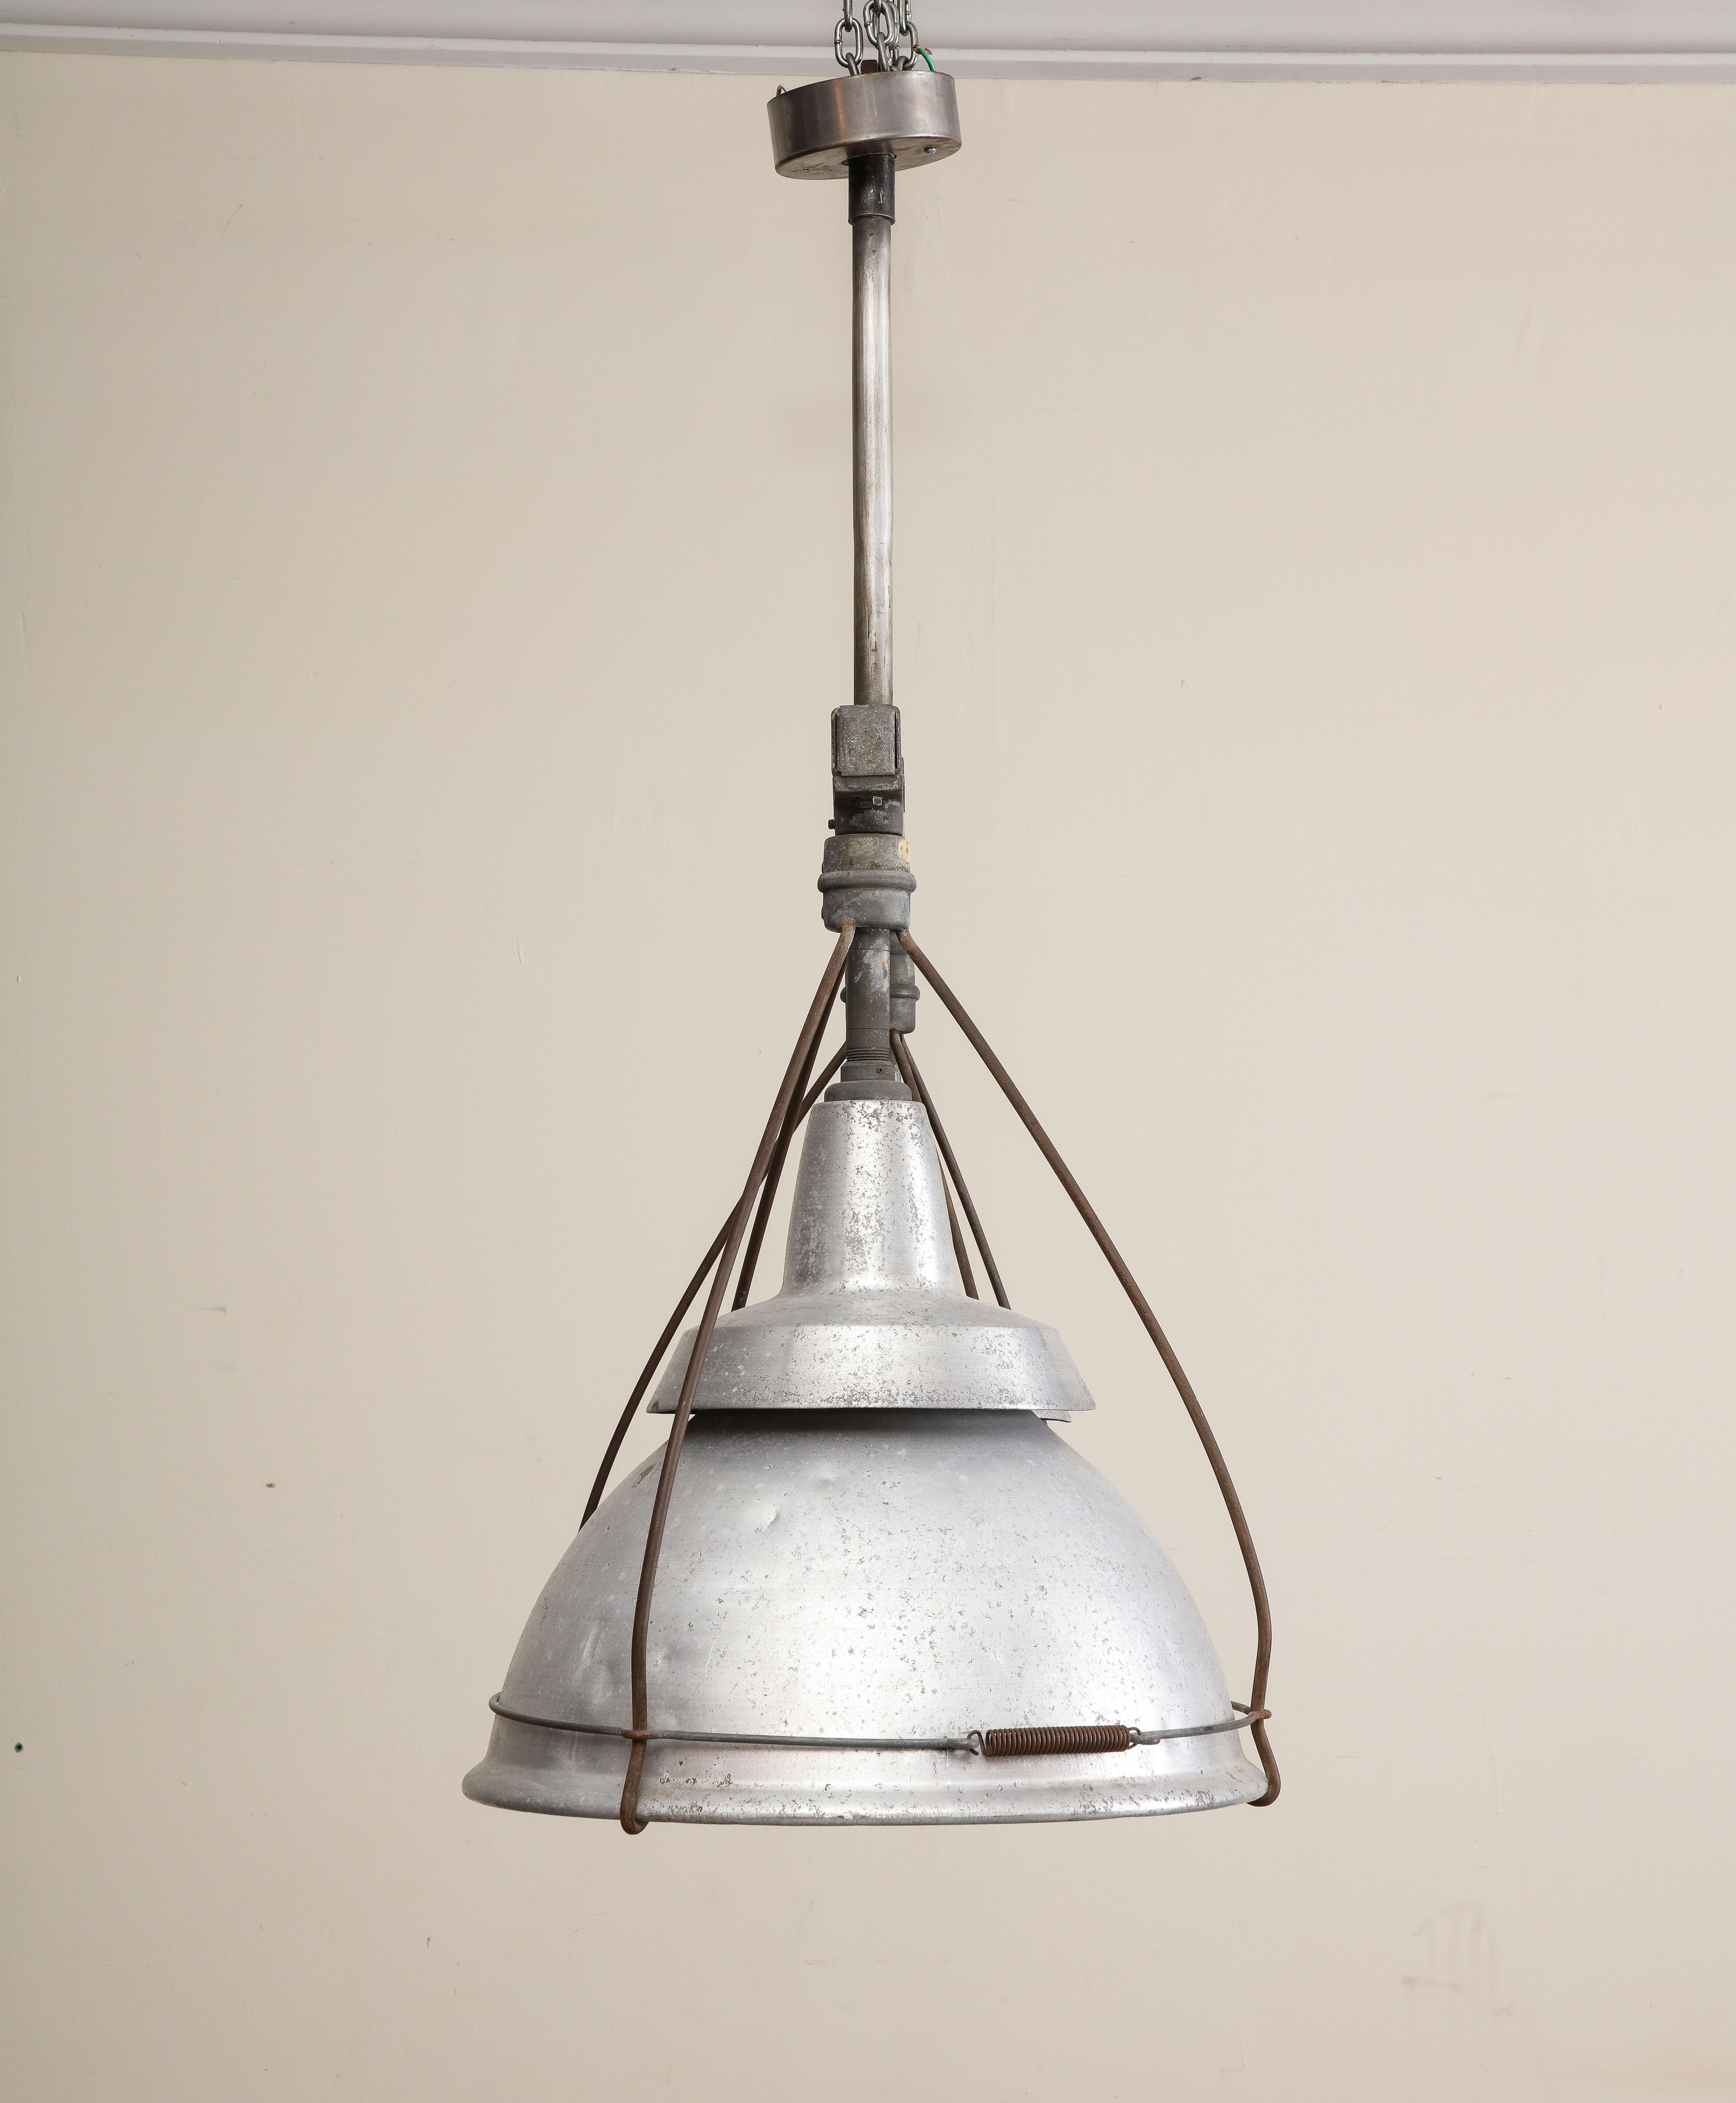 Large Ceiling-Mounted Industrial Double Pendant Light, C. 1920 For Sale 3